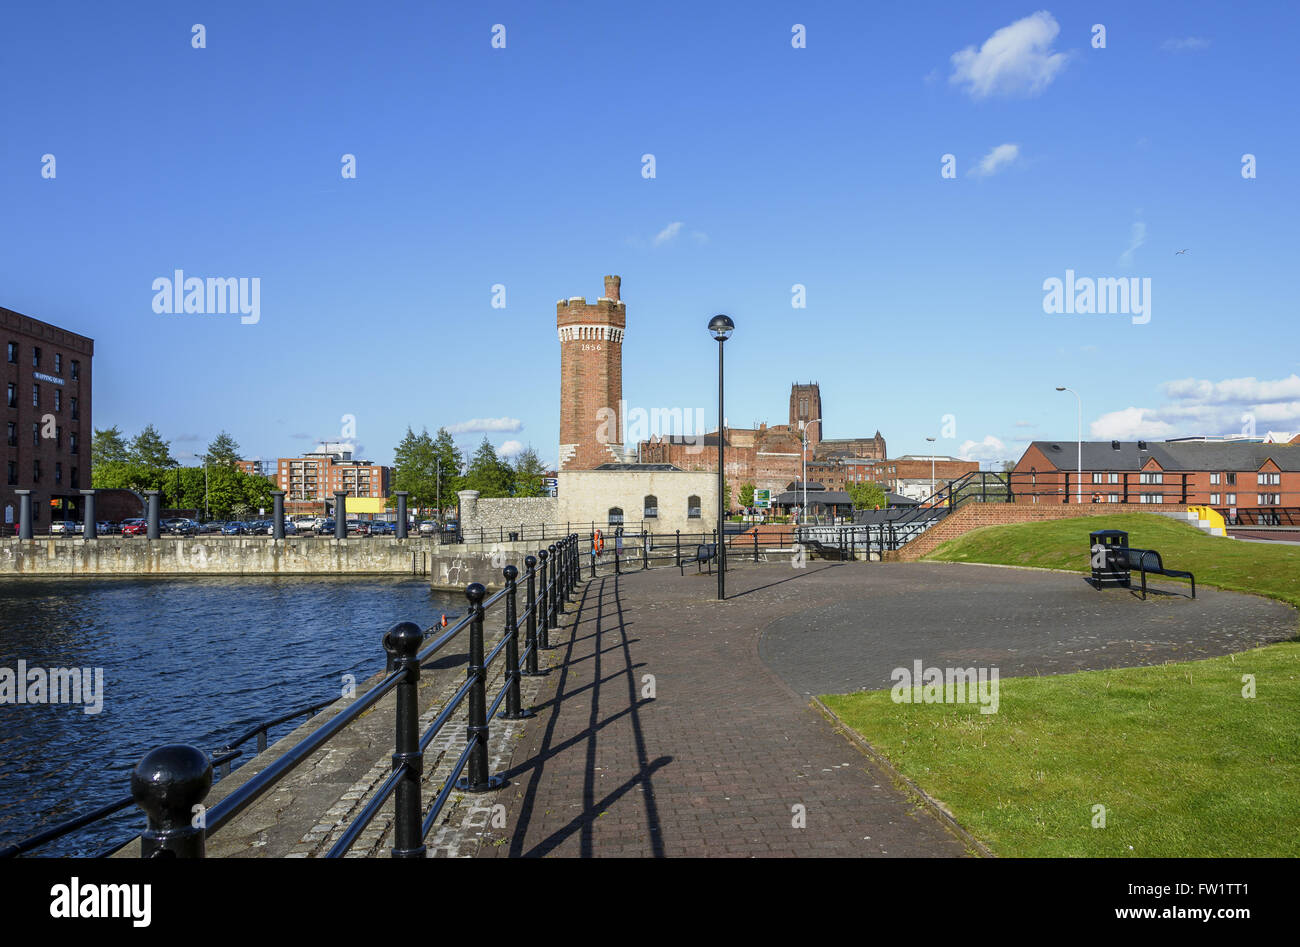 Wapping Dock is a dock on the River Mersey, England, and part of the Port of Liverpool, UK. Stock Photo